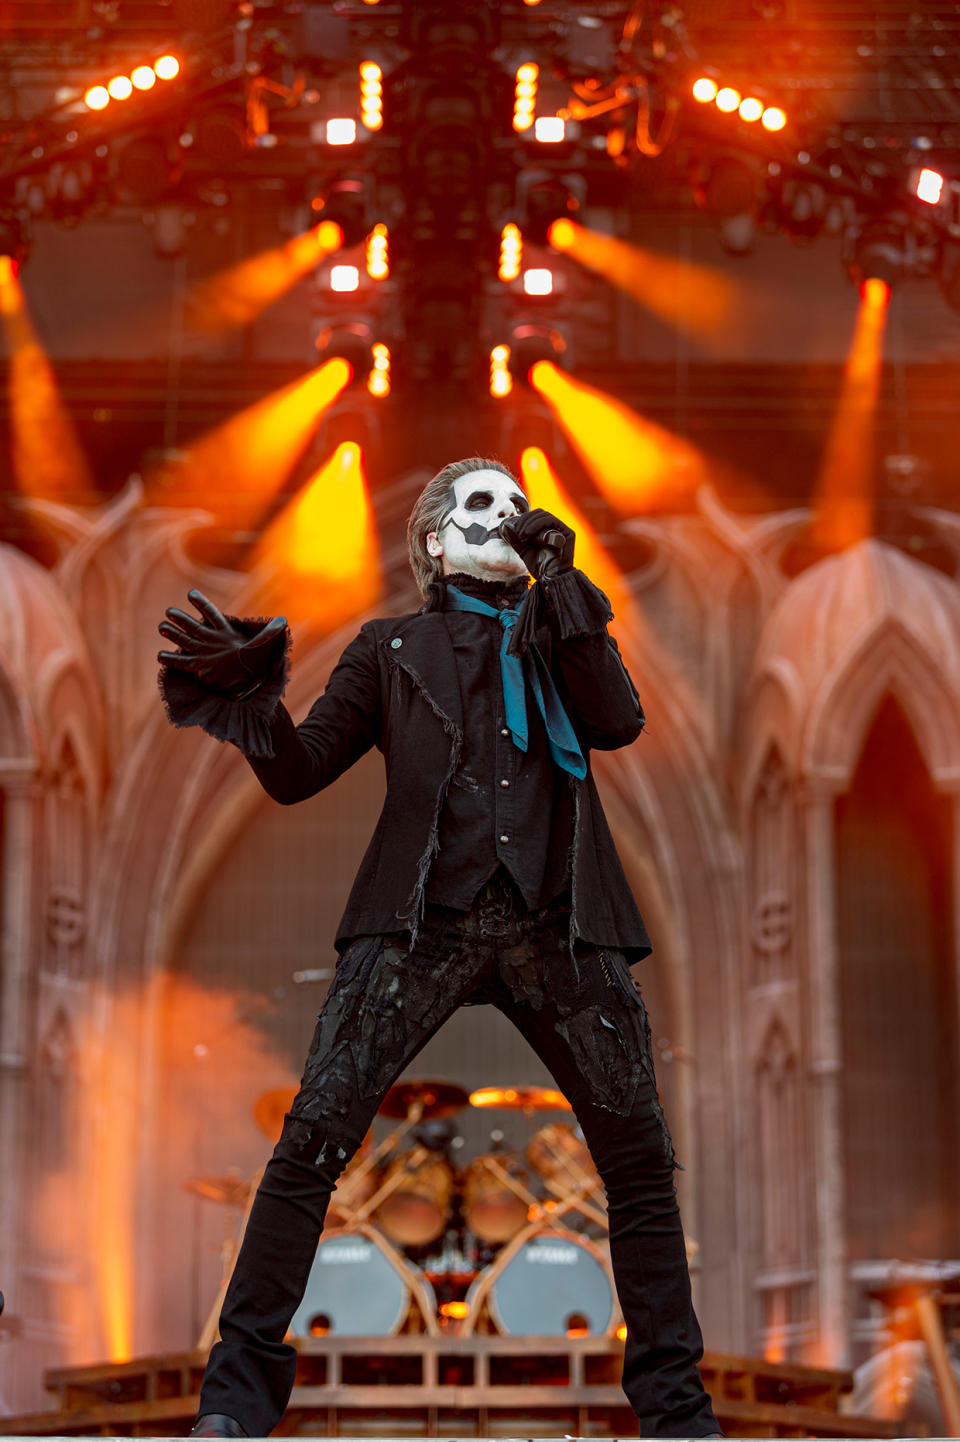 Tobias Forge of Ghost